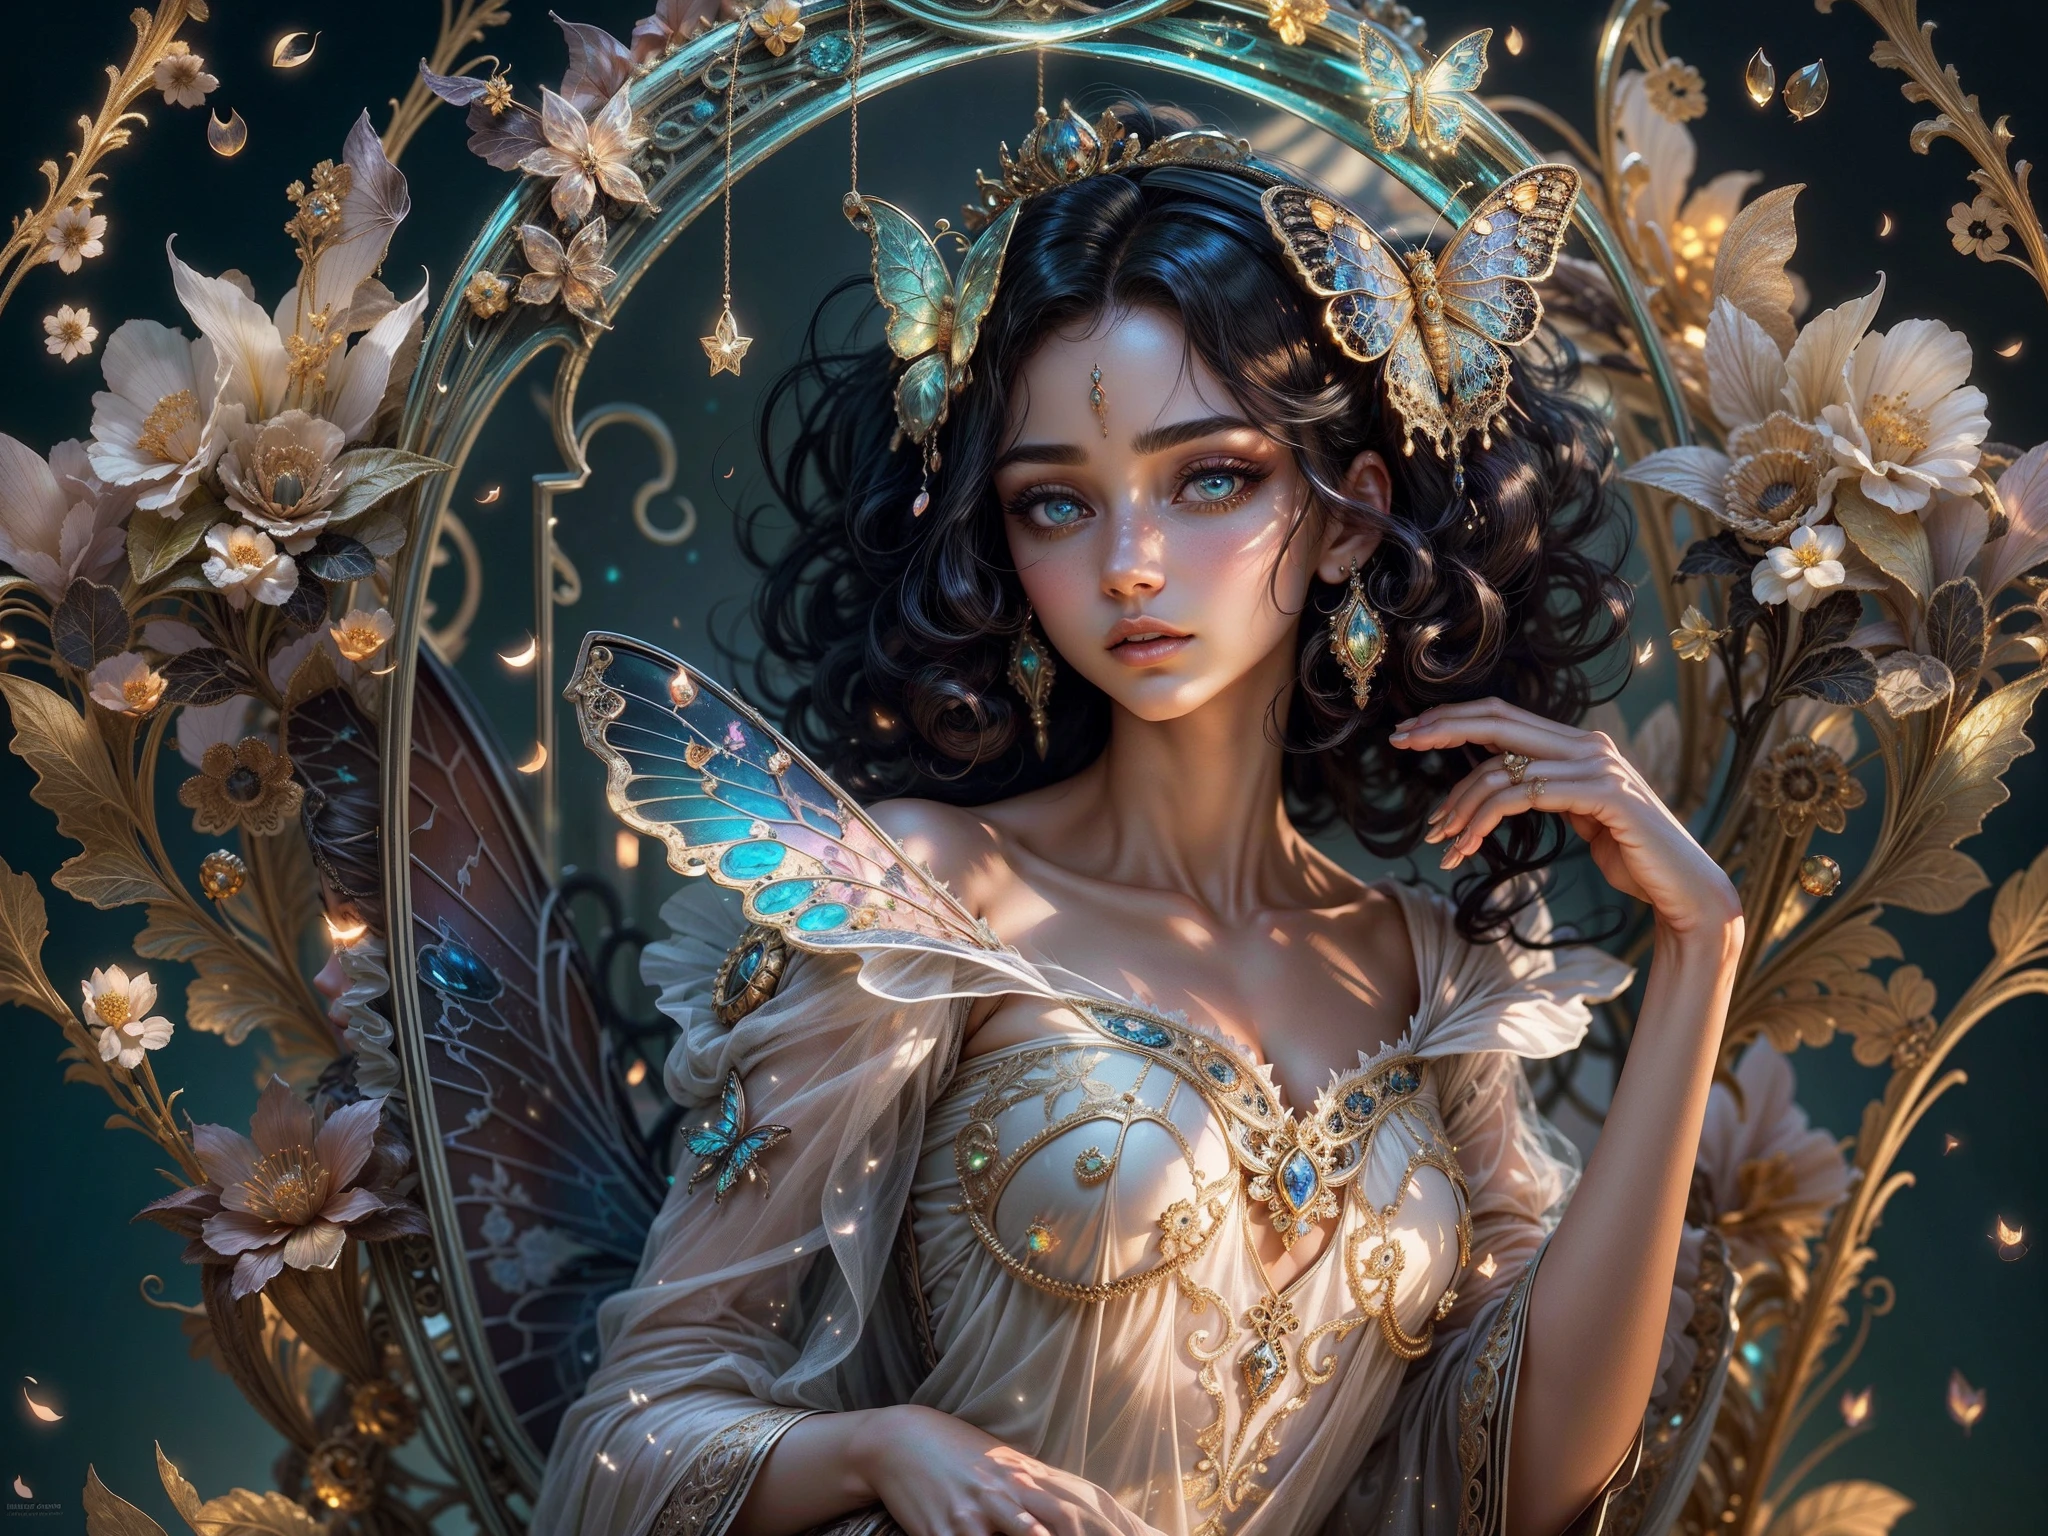 This is a realistic fantasy masterpiece with lots of shimmer, glitter, and intricate ornate detail. Generate one  woman with a beautiful and delicate crown sitting on a garden swing at night. She is a beautiful and seductive butterfly queen with stunning curly black hair, (((incredibly realistic and detailed dynamic eyes in bright colors with realistic shading))).  Her skin is translucent white, her eyes sparkle, and her dress is elegant. Her dress is spun of the finest gossamer silk with delicate, intricate, and subtle floral detailing and gold silk butterfly sleeves. Her face is lovely and lonely. Include glow-in-the-dark flowers, lots of particles, highly realistic fantasy butteflies with translucent jewel-toned wings and fine detailing, and glow. The artwork is done in the style of Guviz and brings to mind masters in the genre such as trending fantasy works on Artstation and Midjourney. Camera: Utilize dynamic composition techniques to emphasize etherealness and delicate detail.